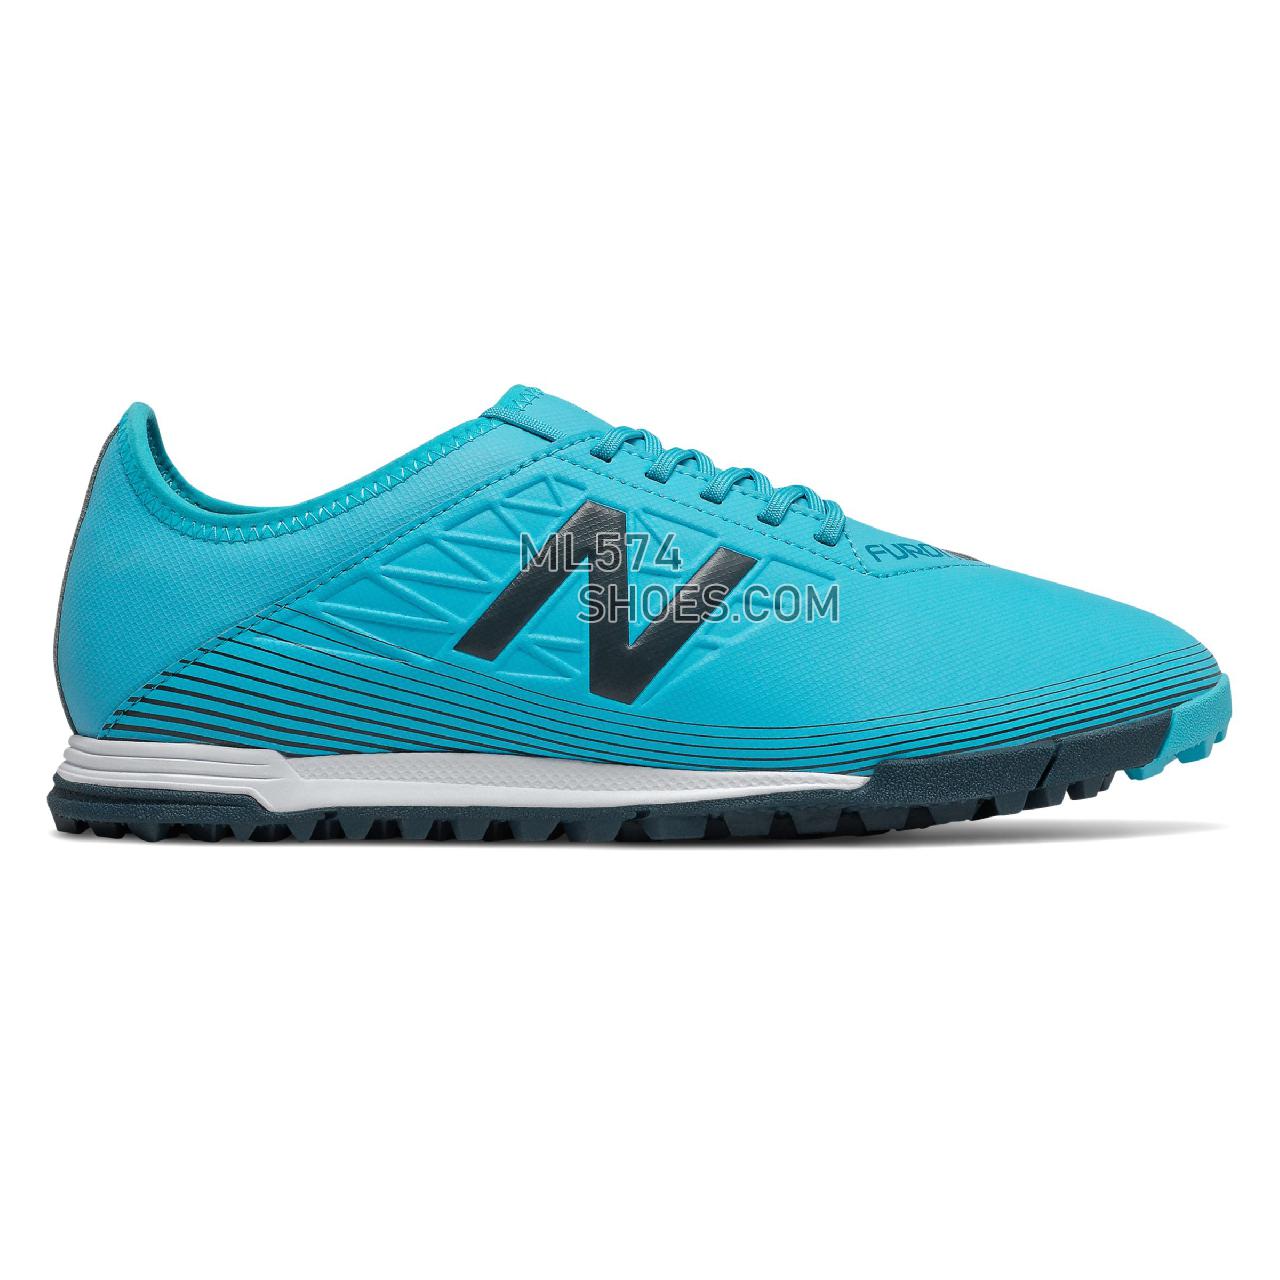 New Balance Furon v5 Dispatch TF - Men's Soccer - Bayside with Supercell - MSFDTBS5